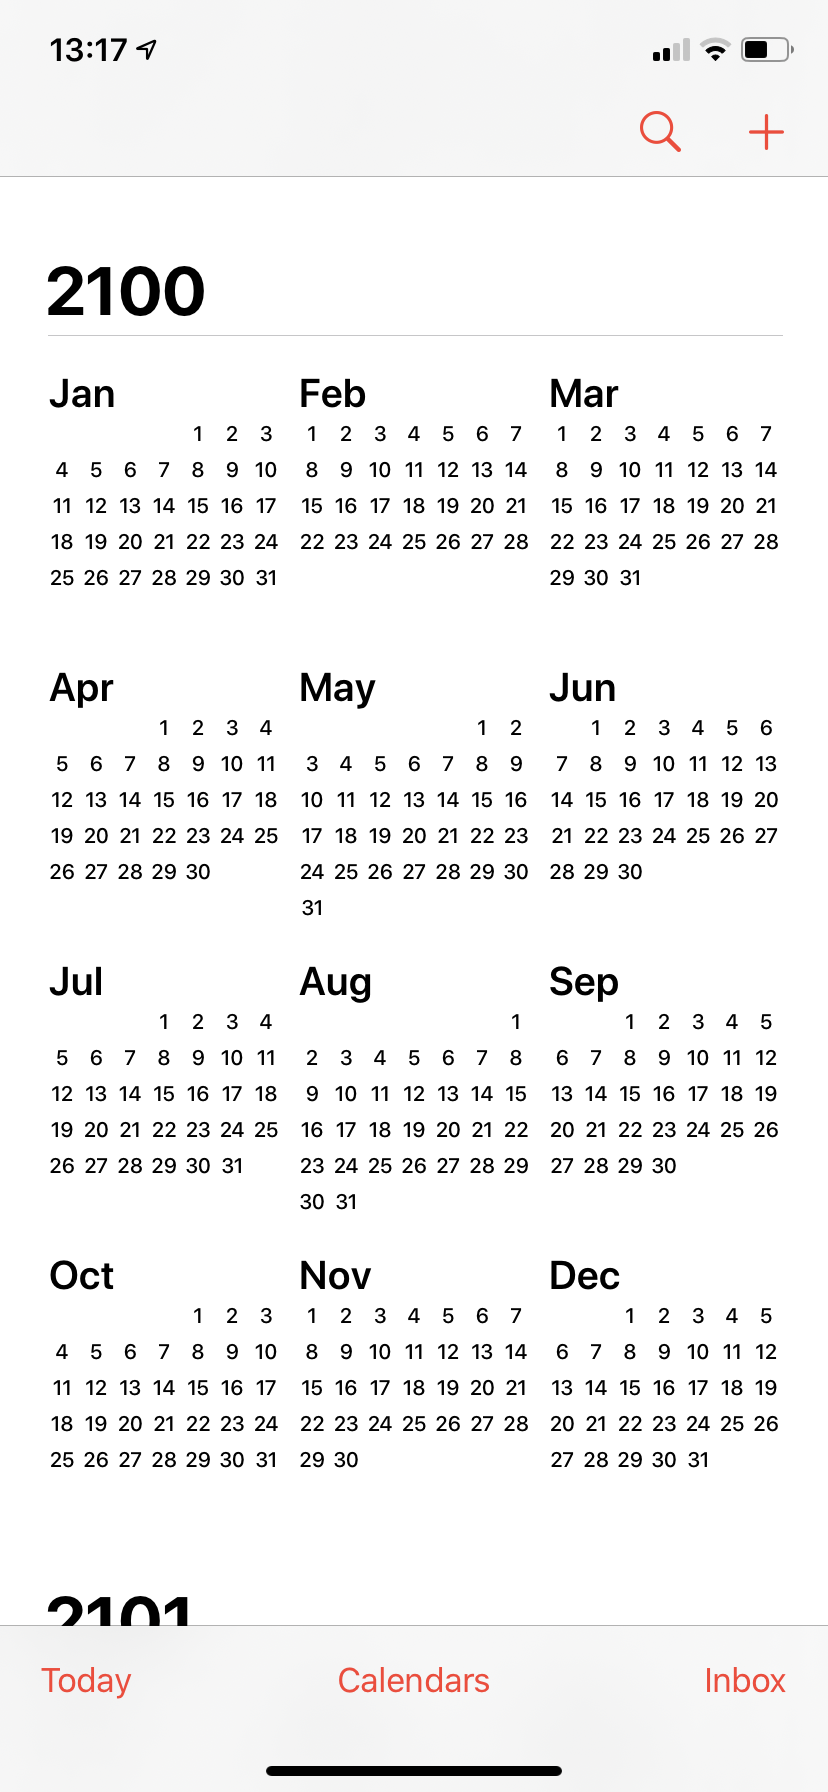 Screenshot of iOS
calendar app, showing the year view for the year 2100.